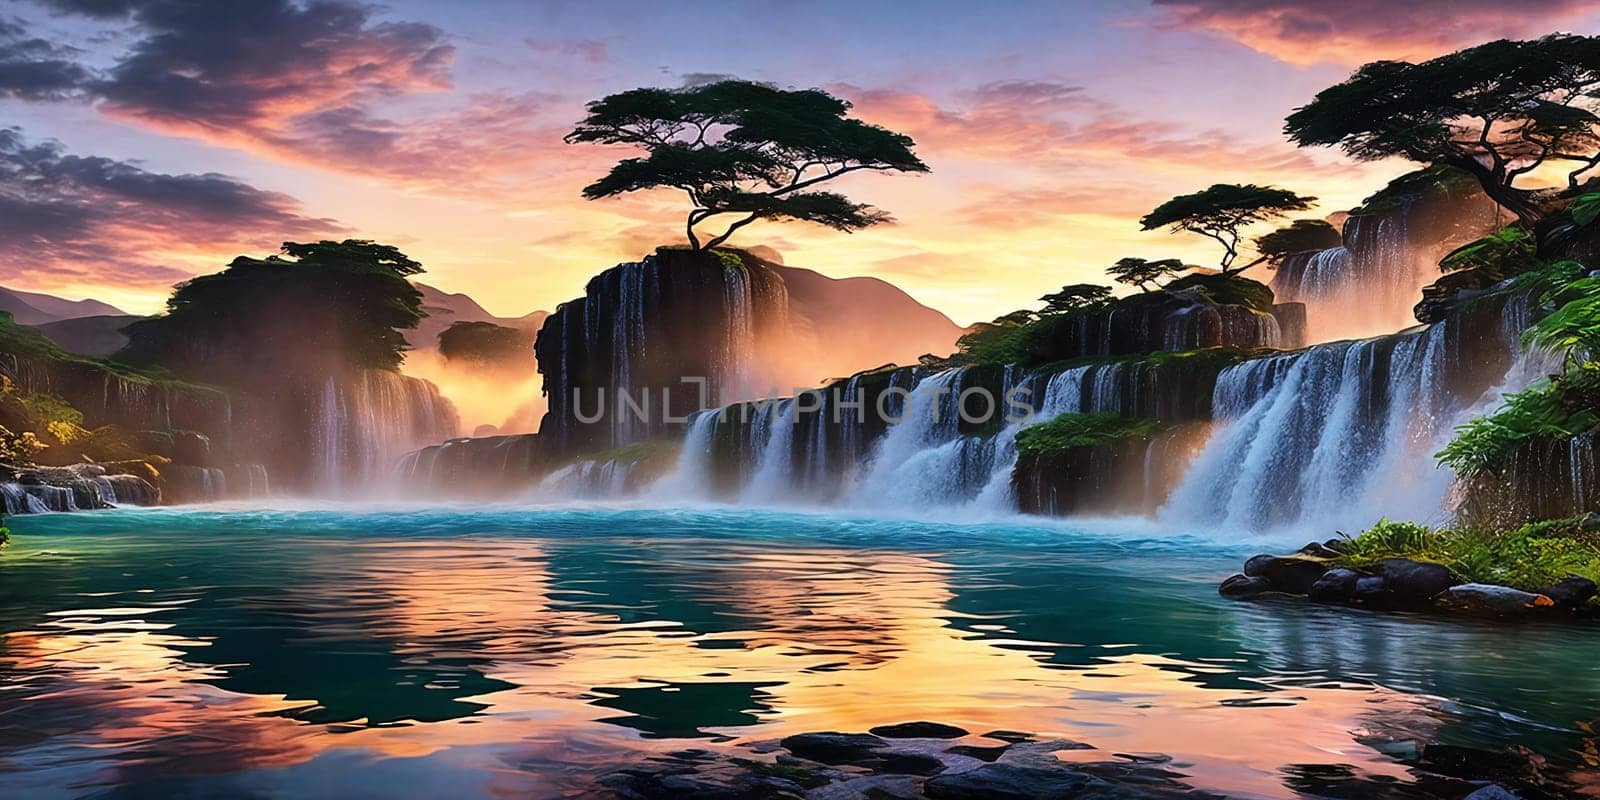 Waterfall reflecting the colors of the sunset in its shimmering waters, creating a mirror-like effect that adds depth and visual interest to the illustration.